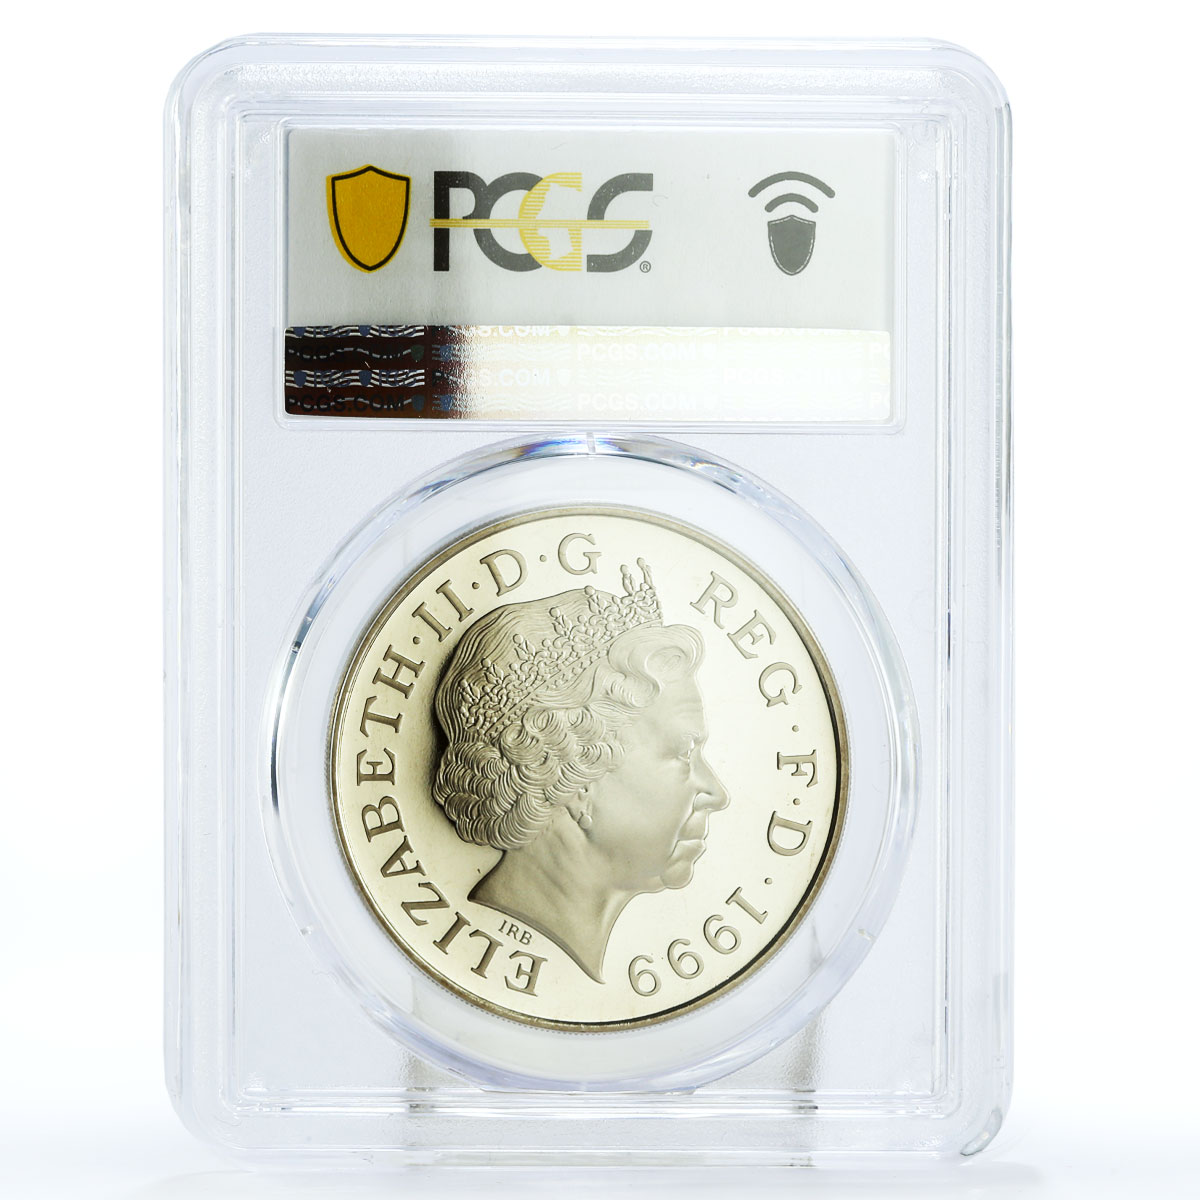 Great Britain 5 pounds In Memory of Princess Diana PR67 PCGS CuNi coin 1999